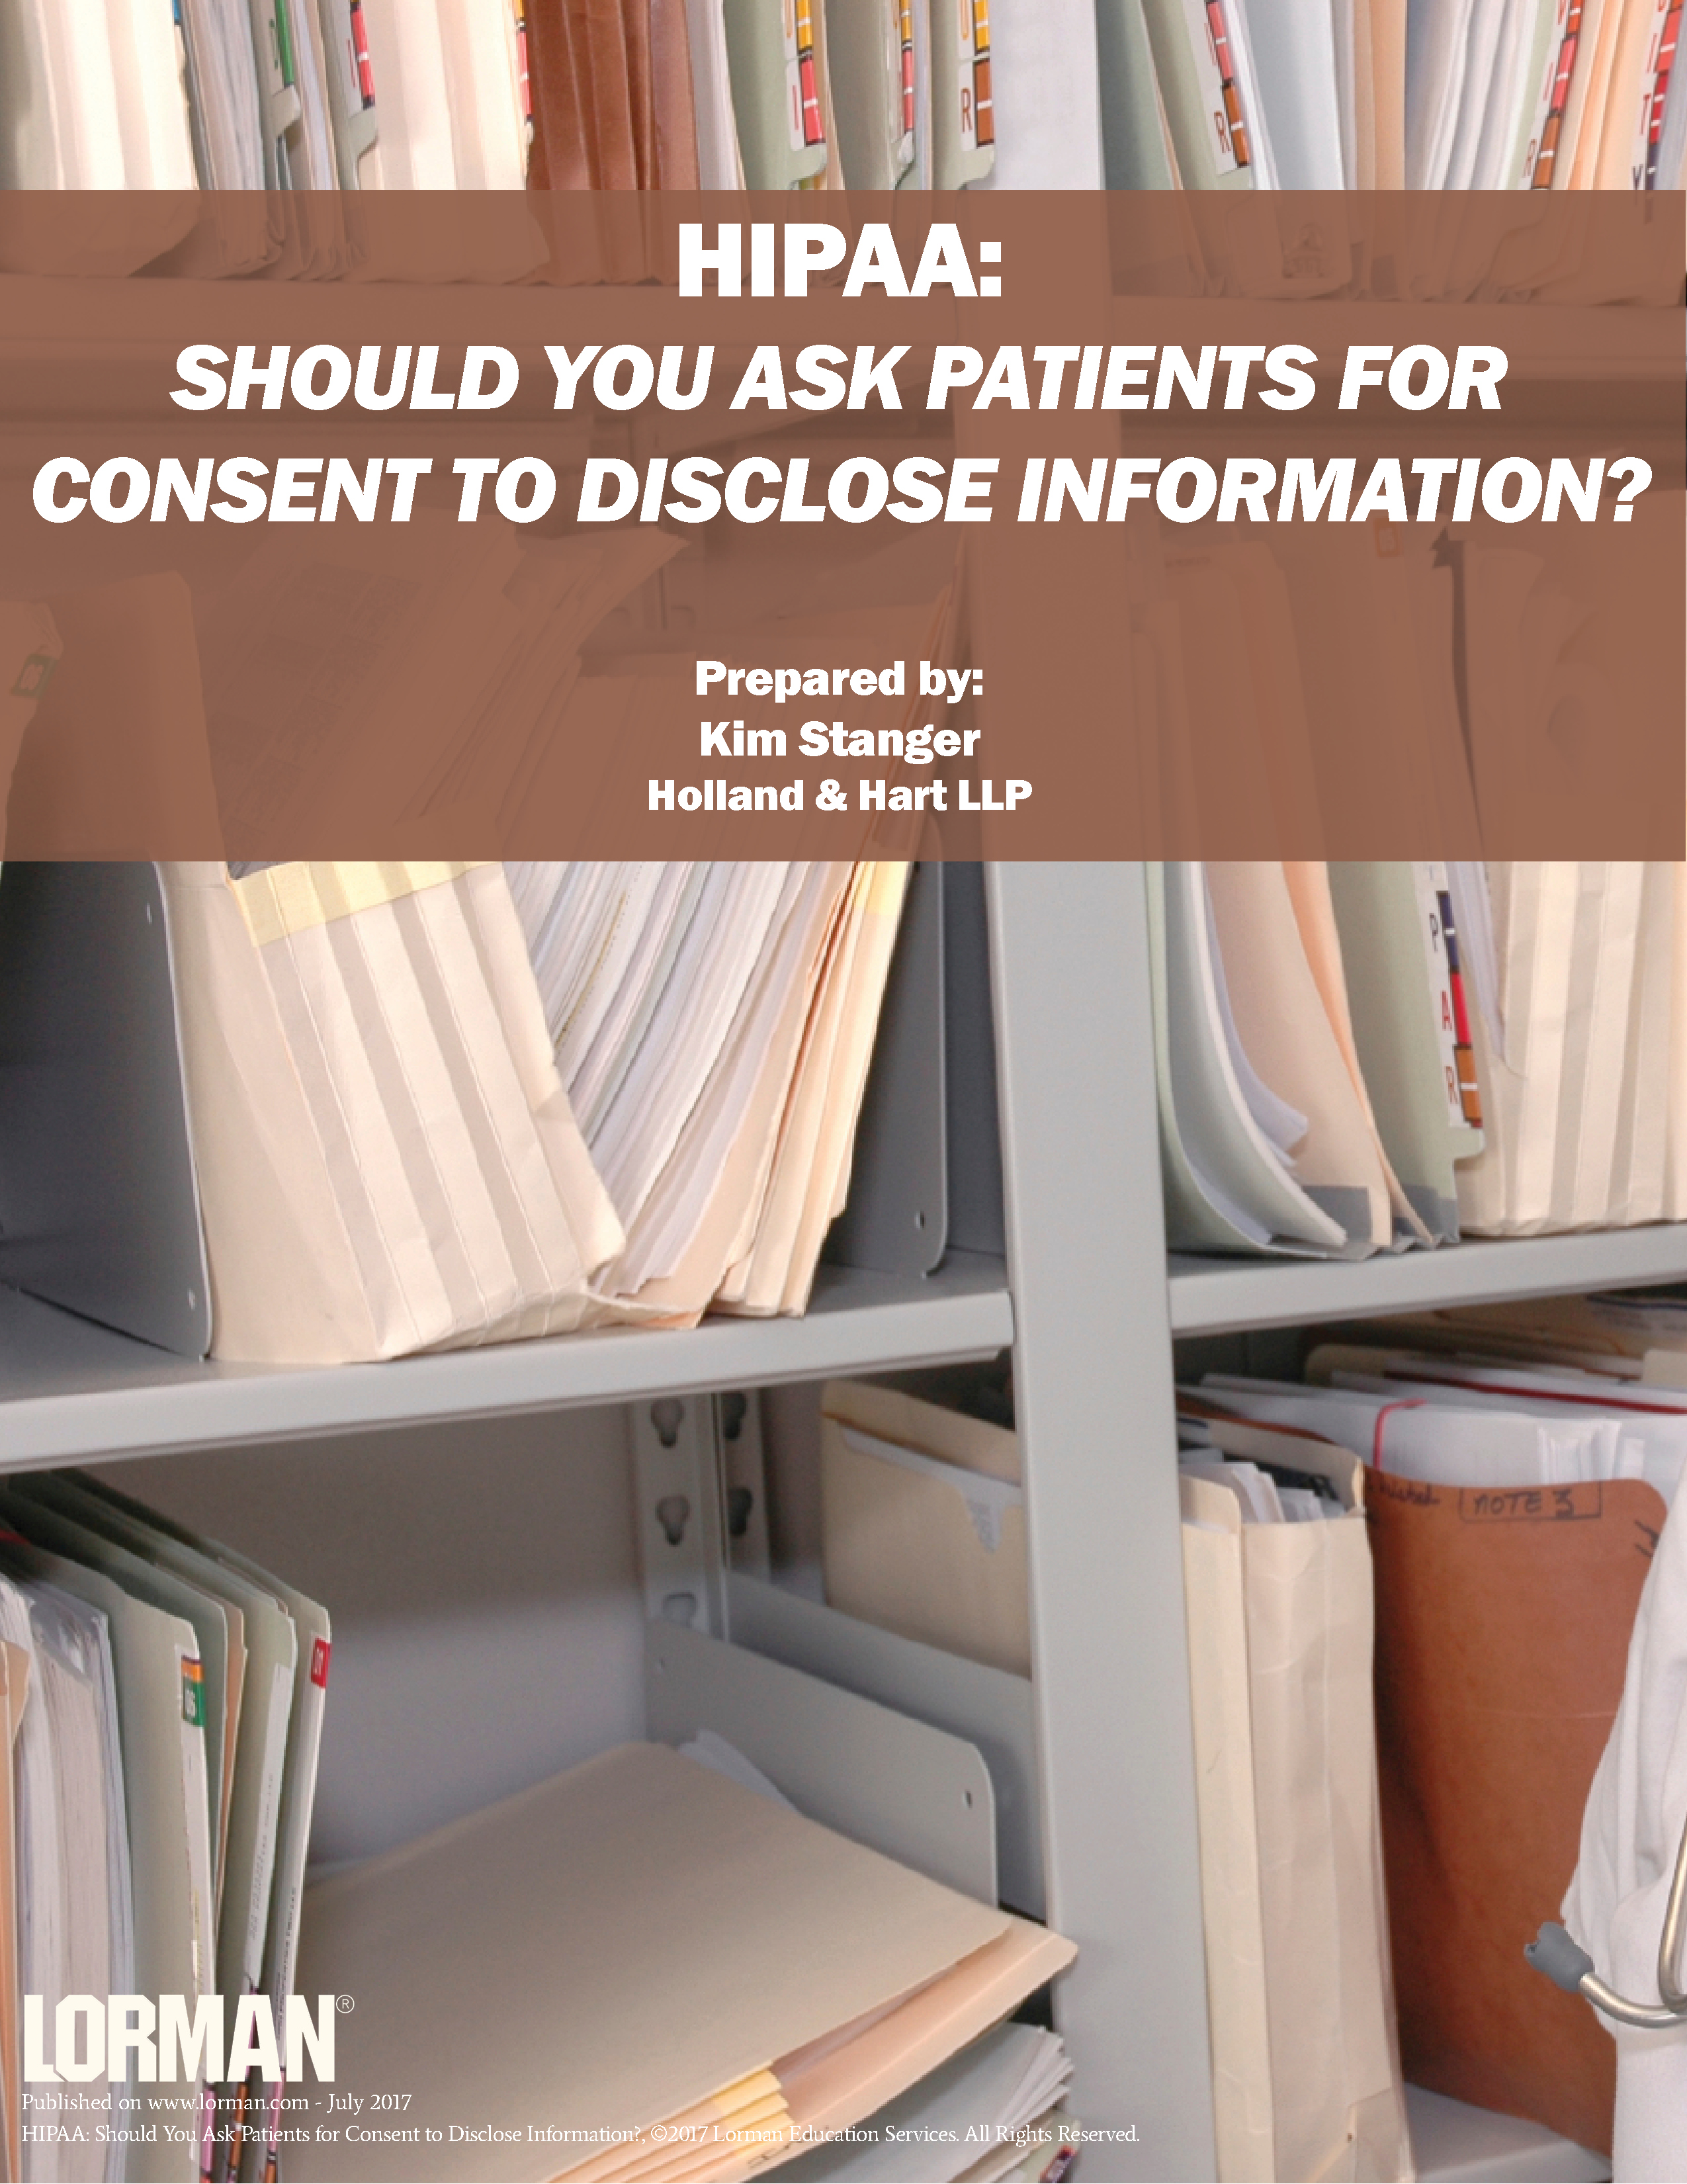 HIPAA: Should You Ask Patients for Consent to Disclose Information?